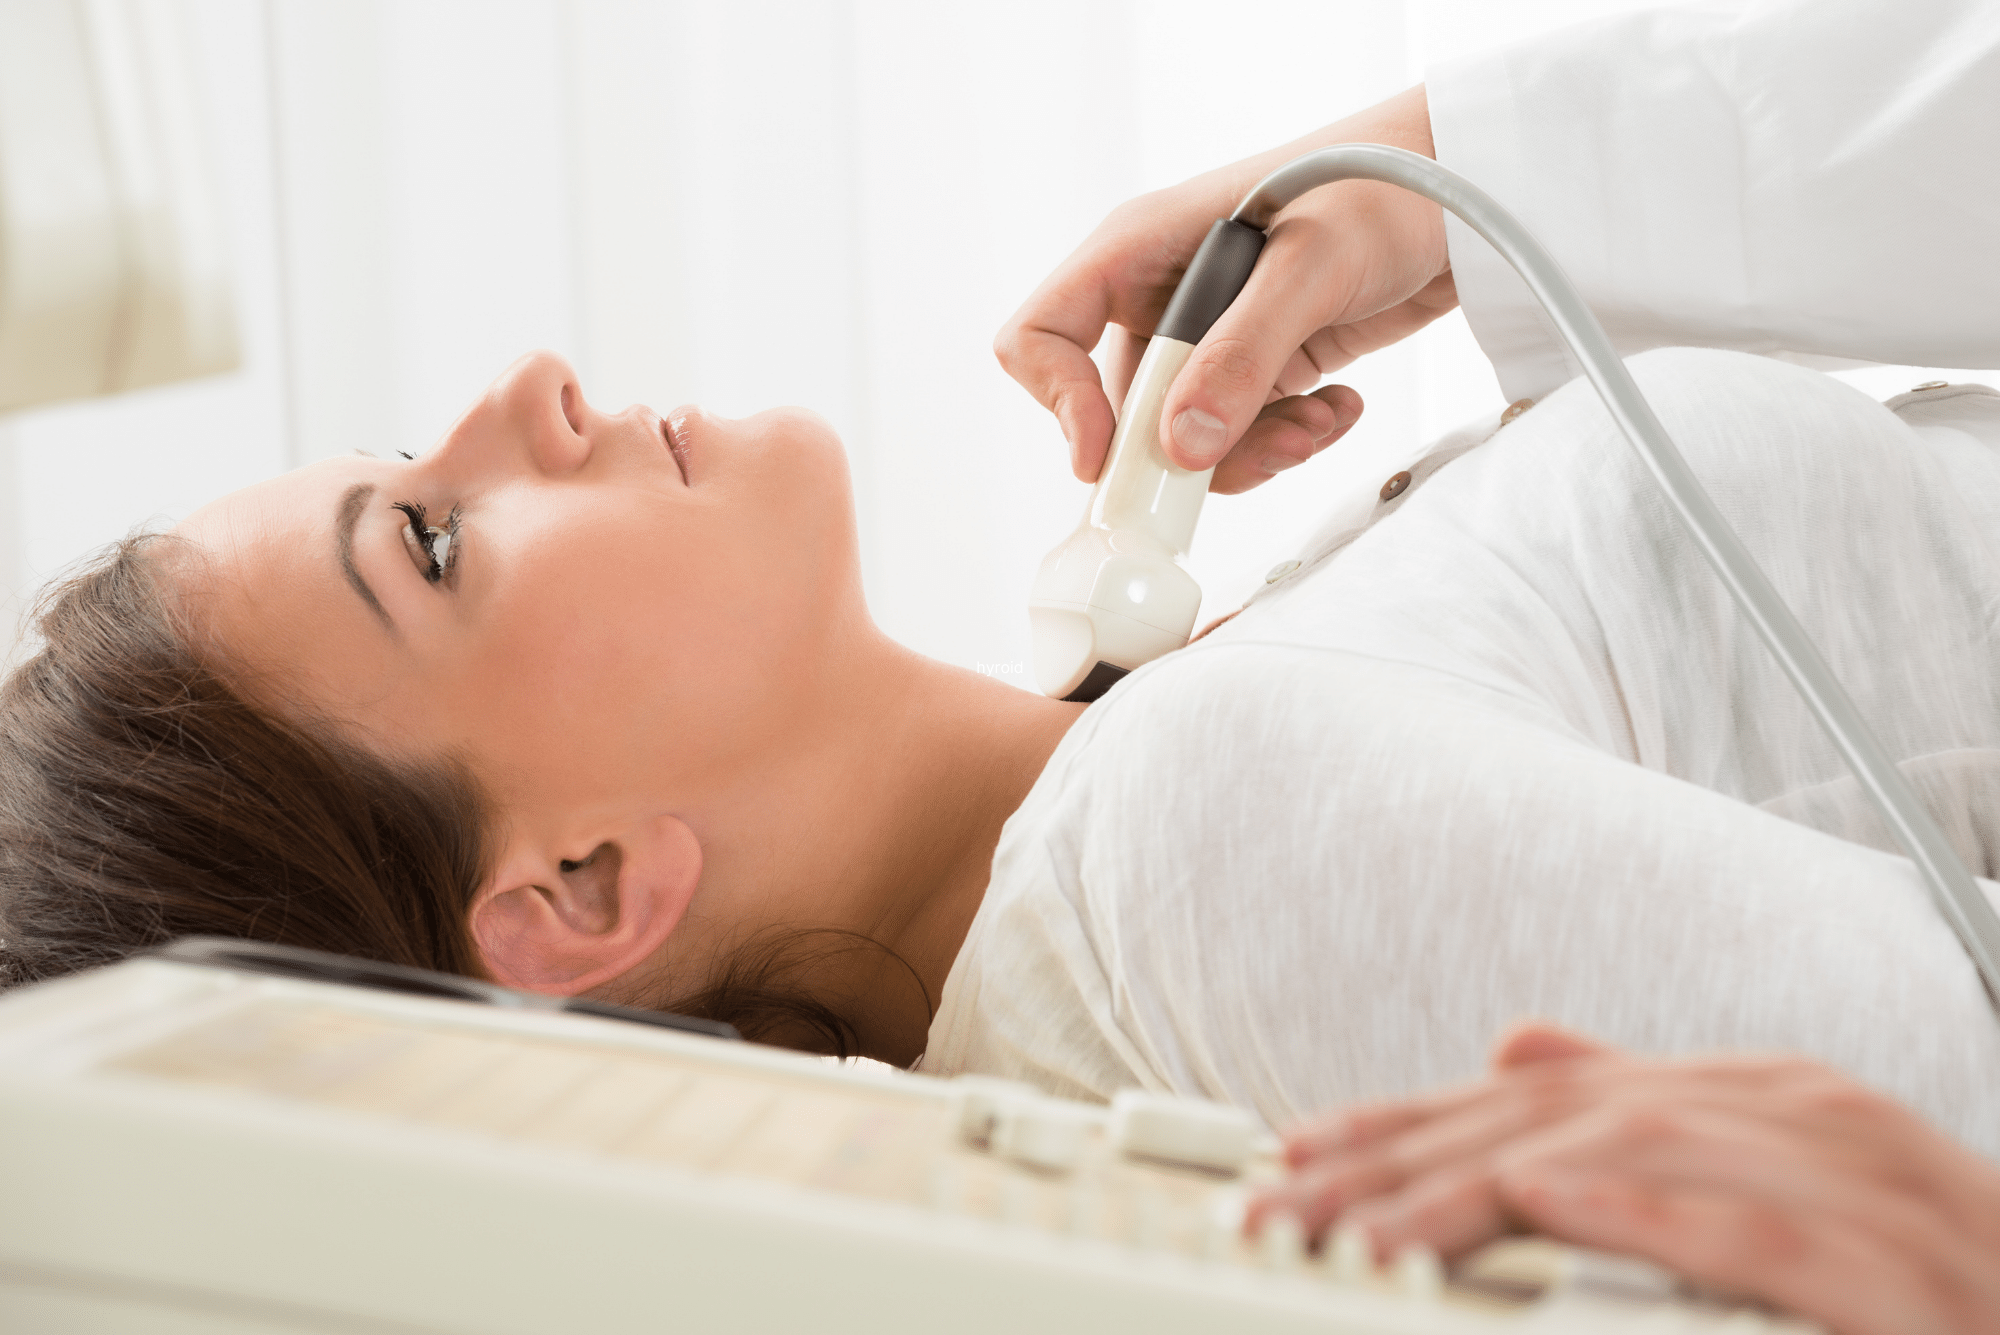 A woman in white reclines while a doctor uses ultrasound to check her thyroid.